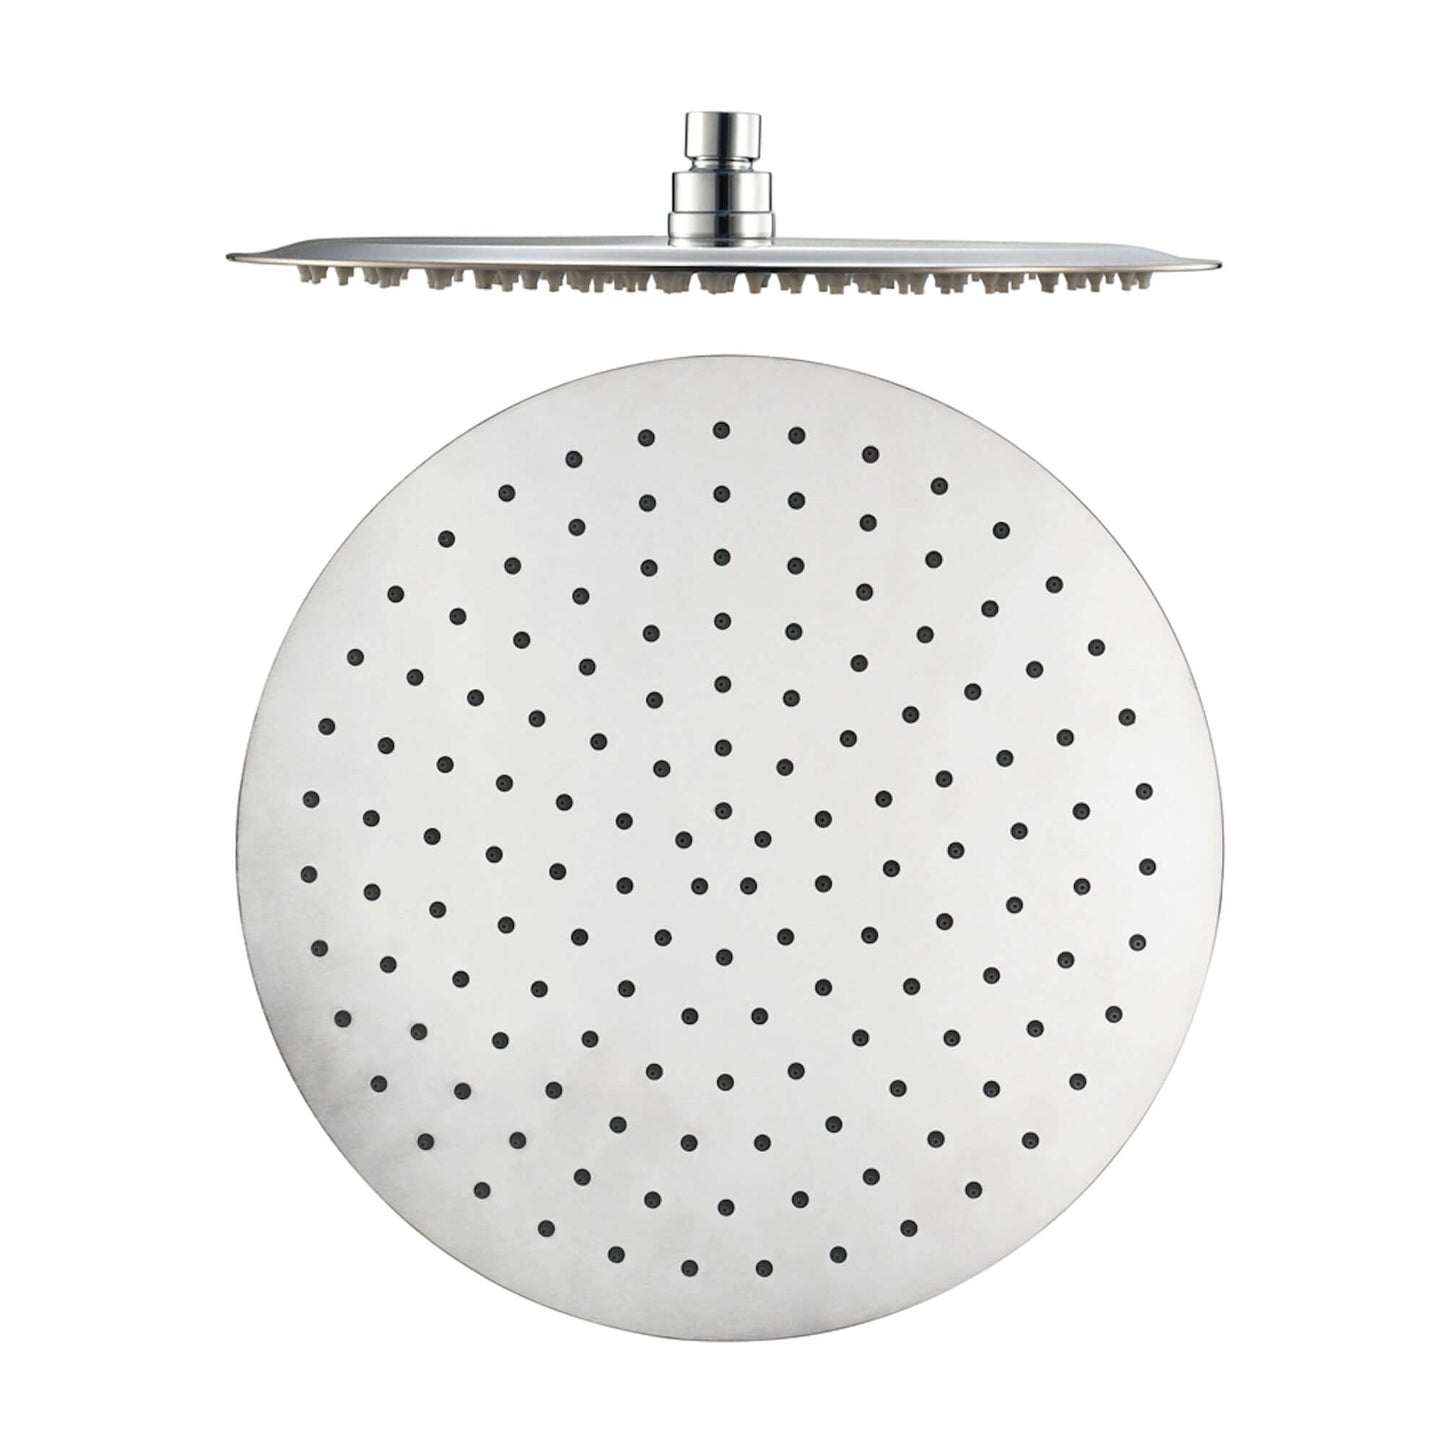 Contemporary Wall Fixed Round Ultra Slim Stainless Steel Shower Head 12" With Shower Arm - Chrome